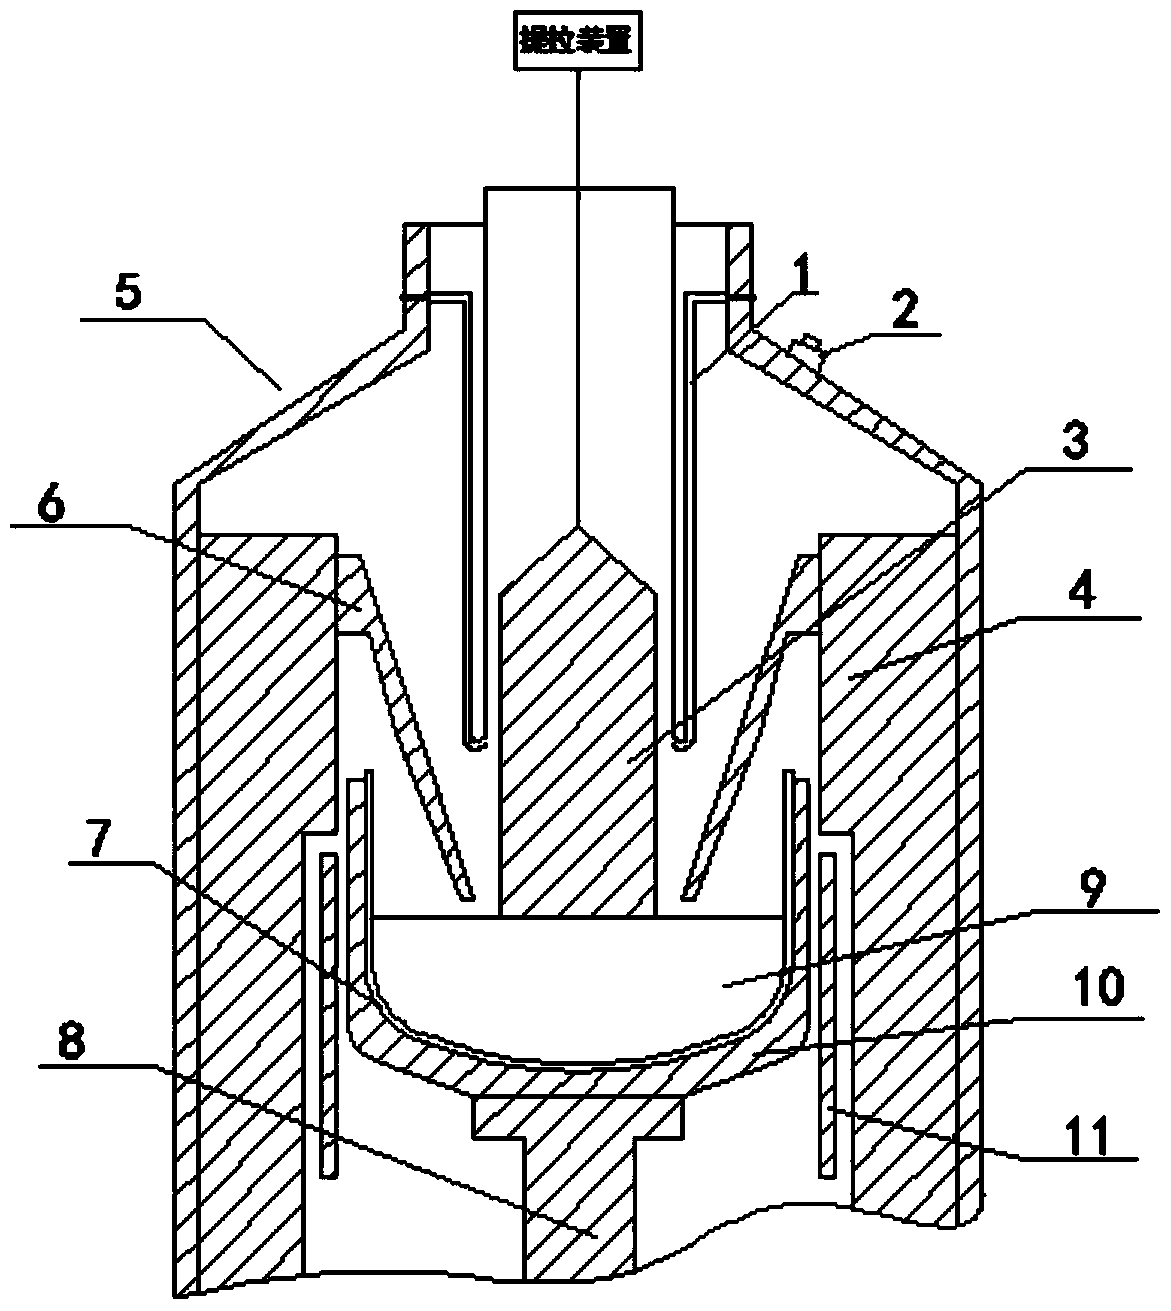 A high-speed single crystal growth device and method